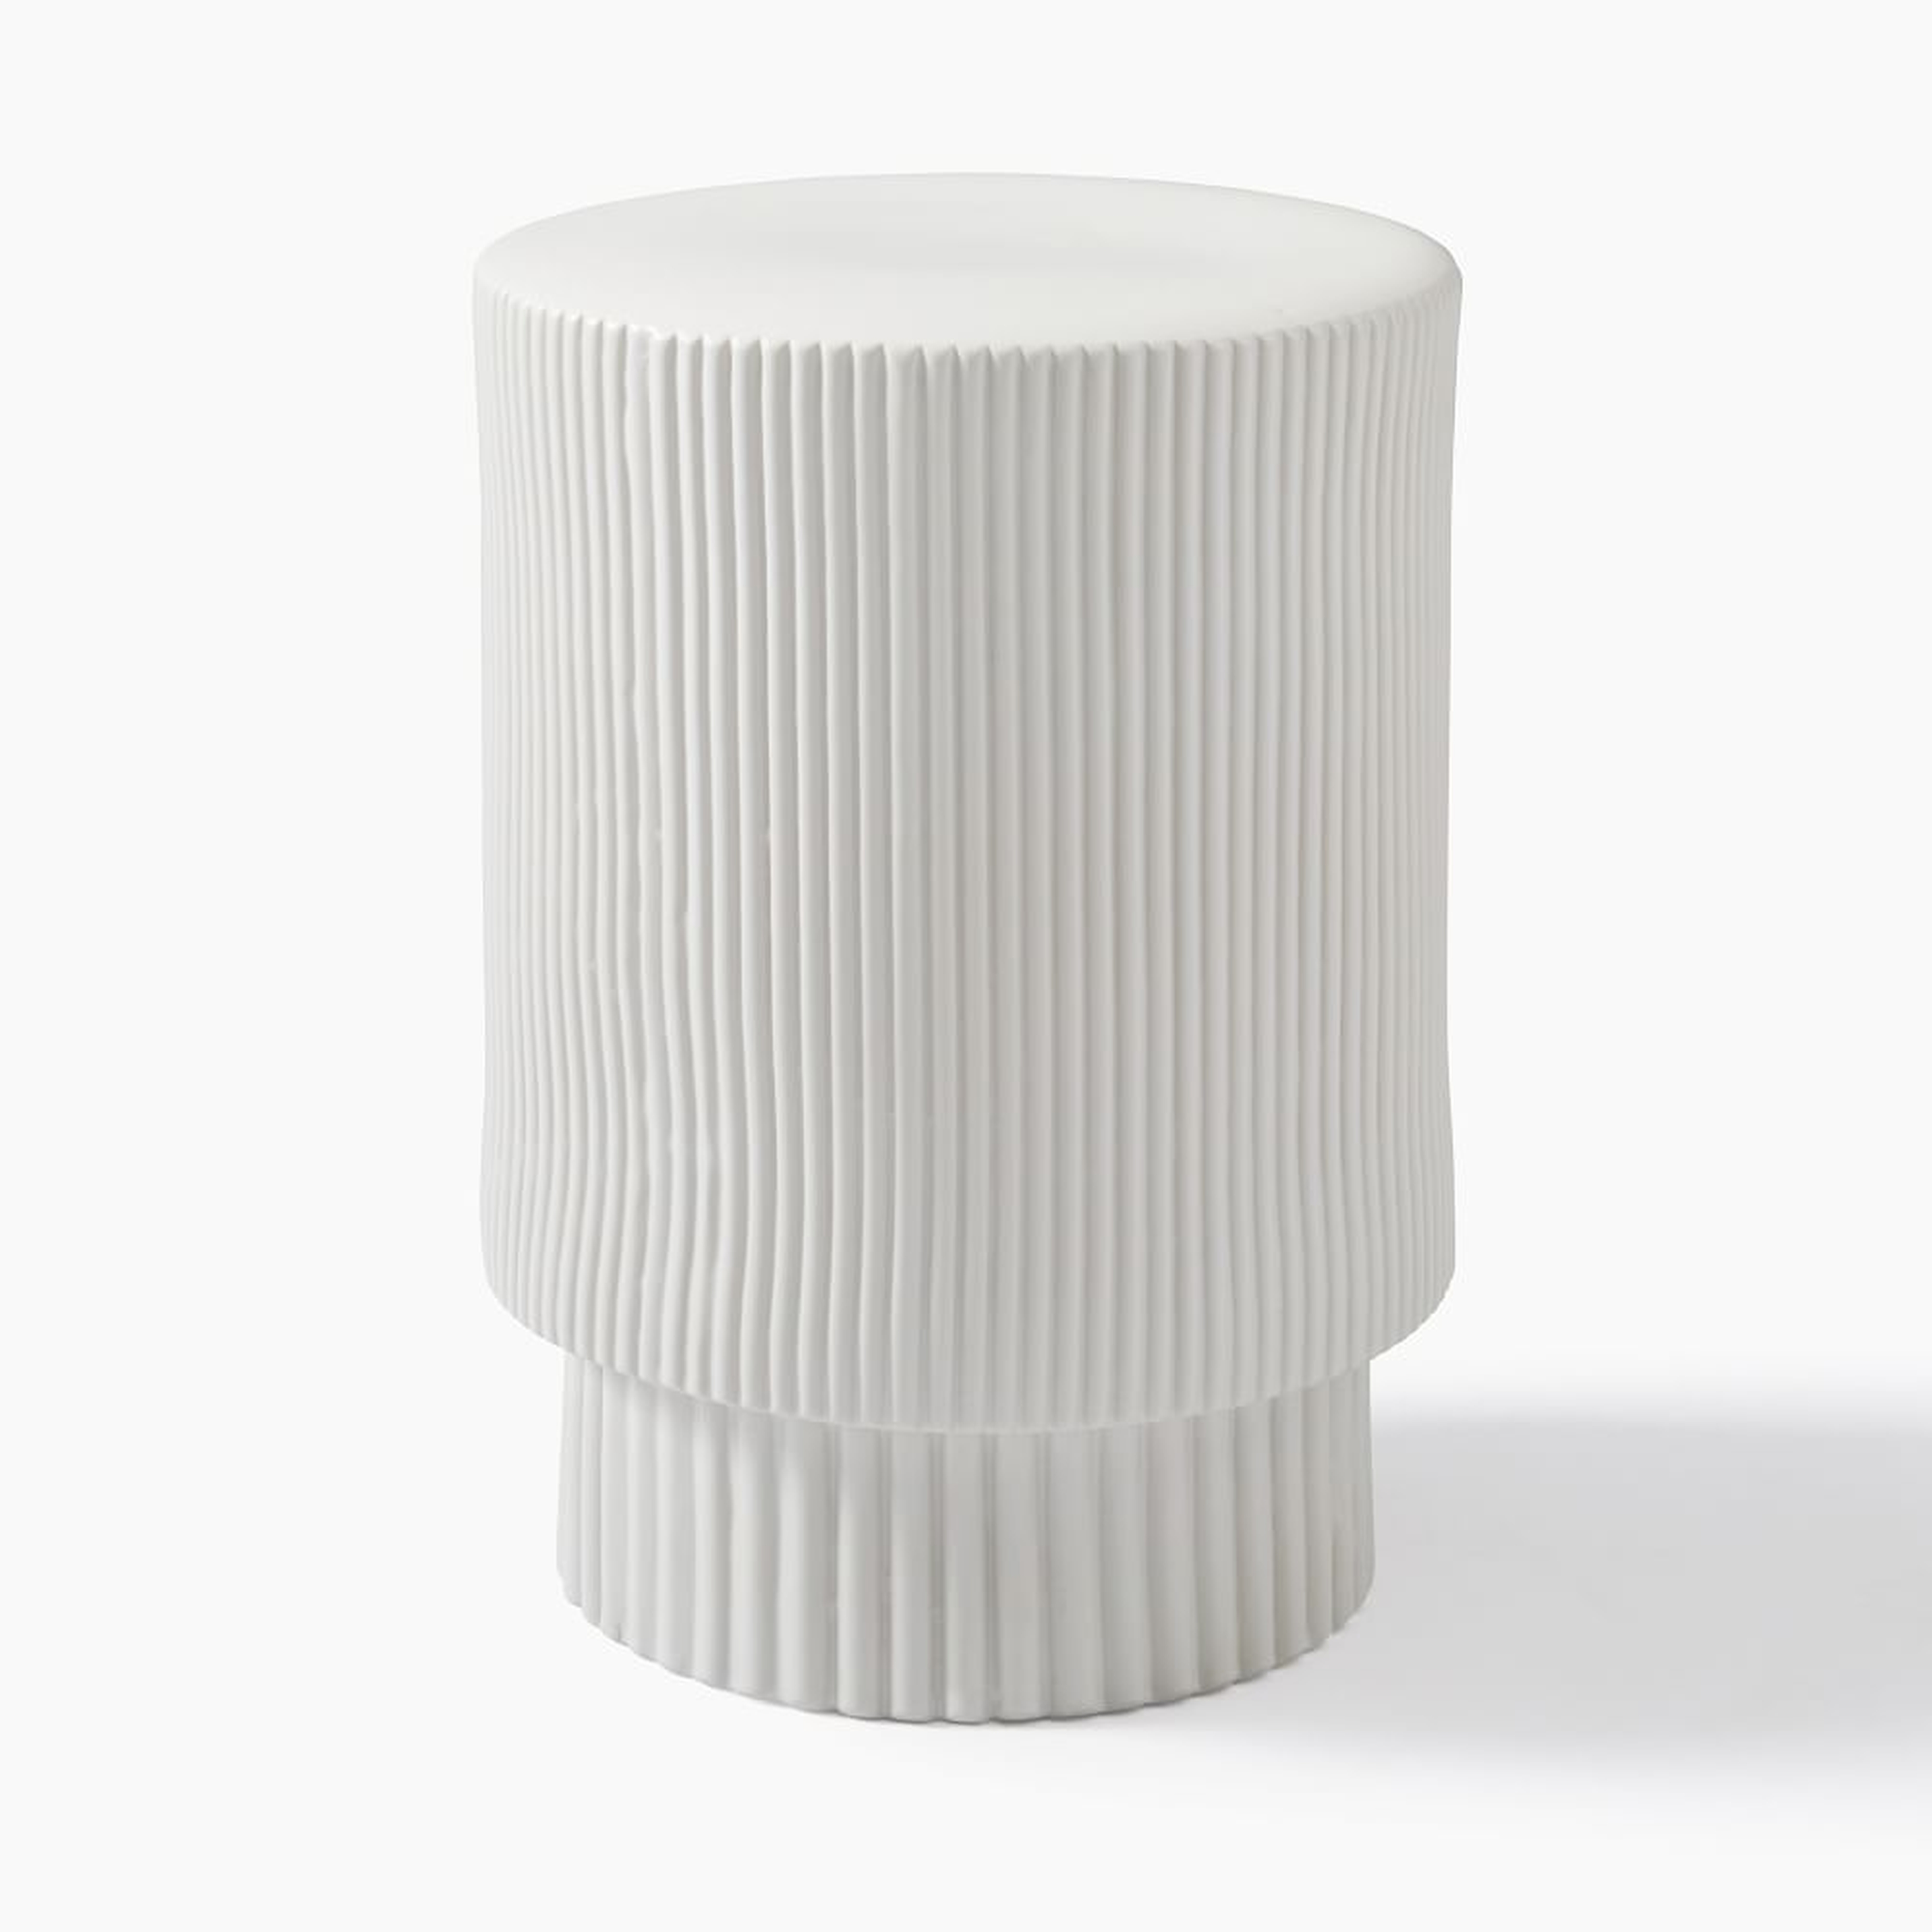 Textured (13") Collection Side Table, White - West Elm